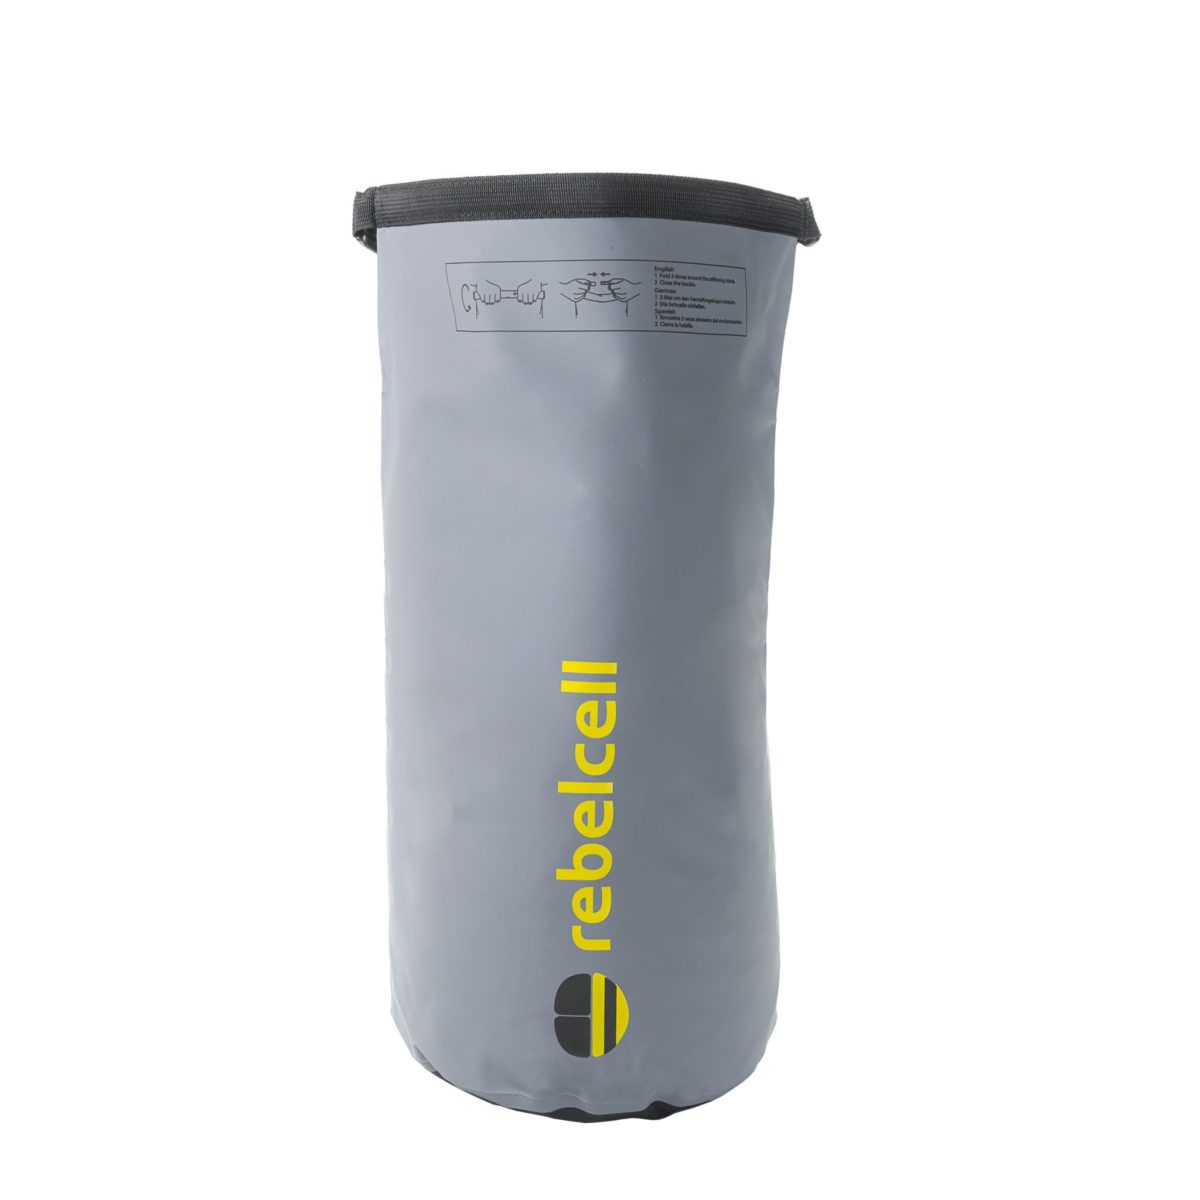 Rebelcell Dry Bag Medium (15L) product image